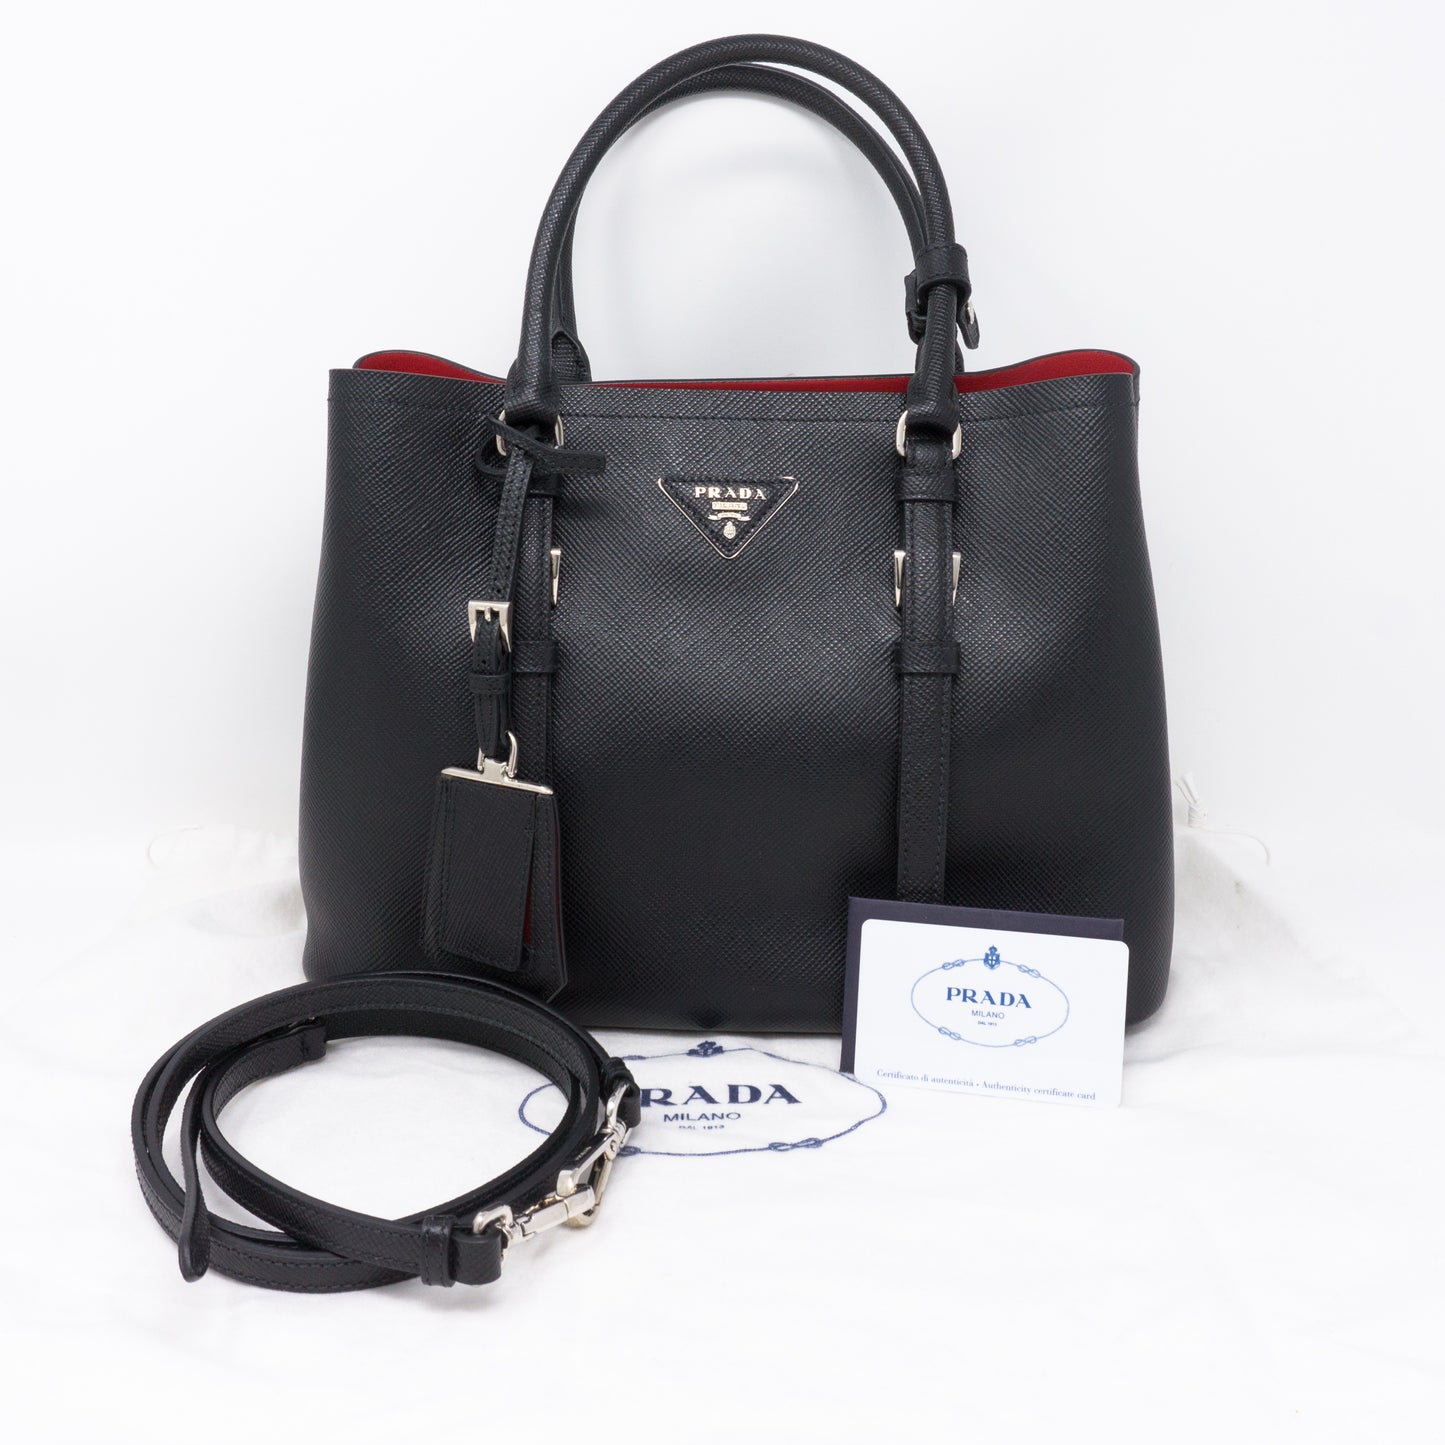 Black Double Bag Small